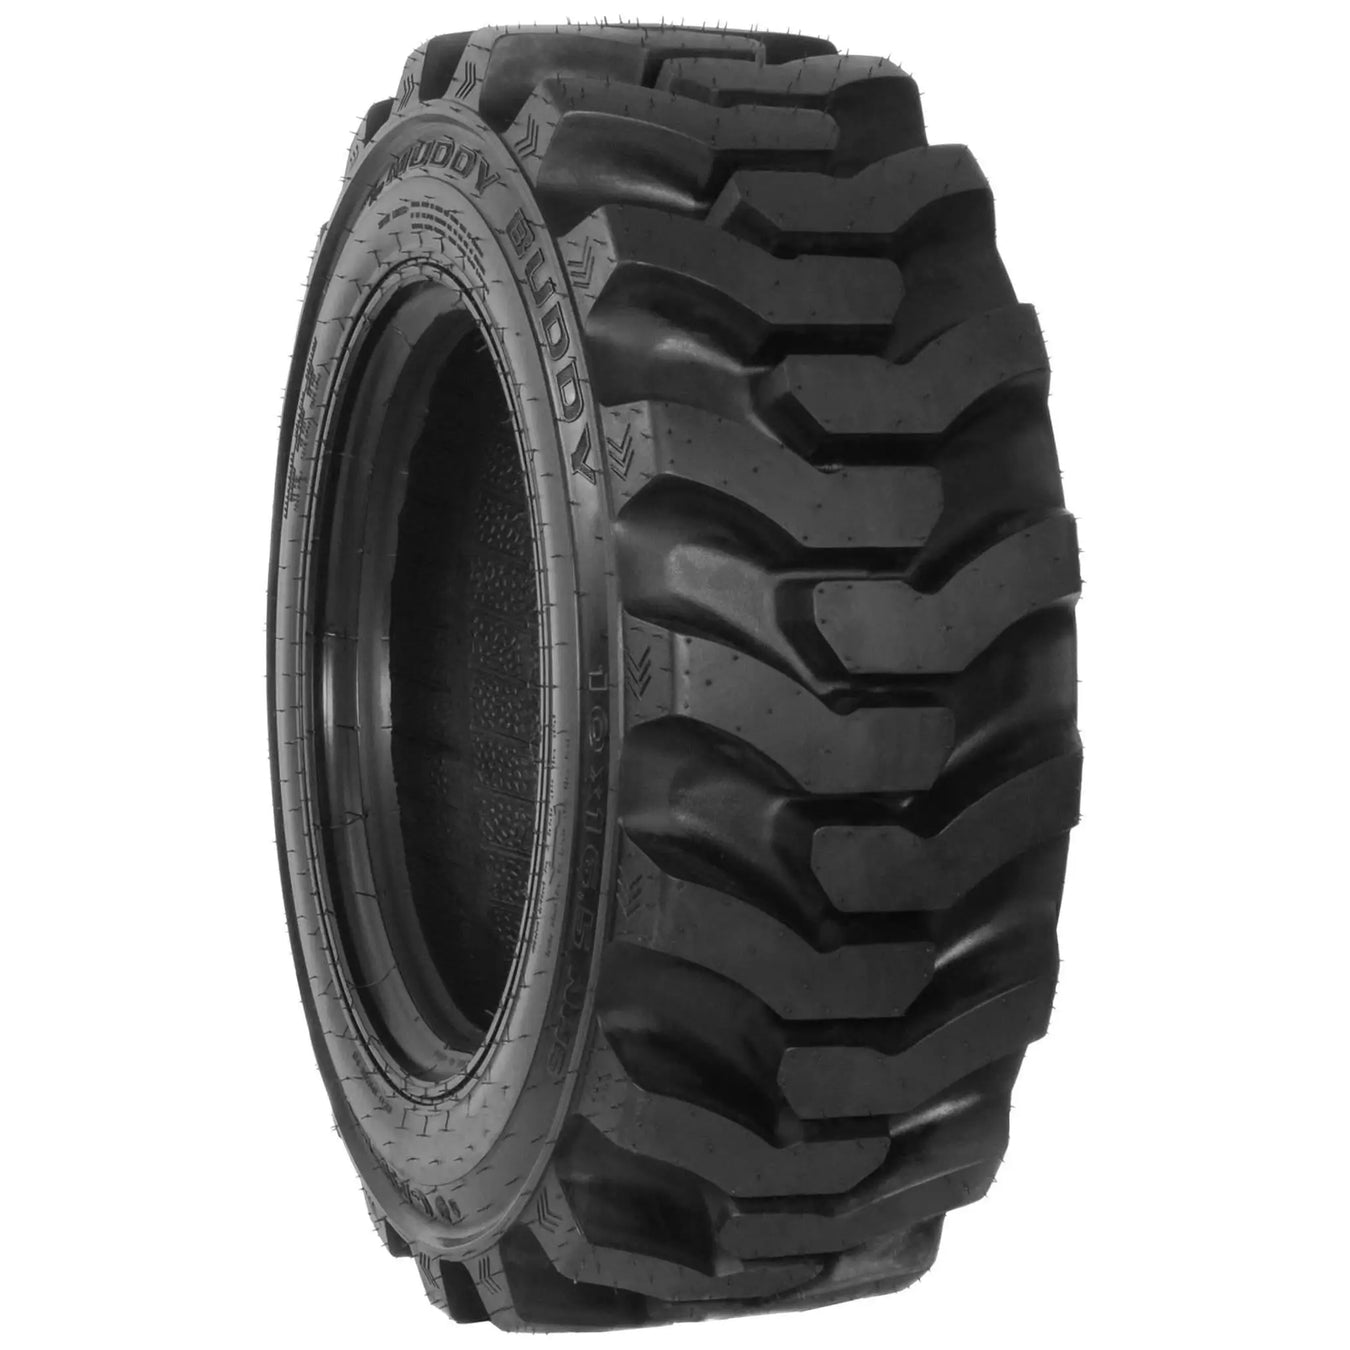 Skid Steer Tires - Pneumatic Tire Size - 10-16.5